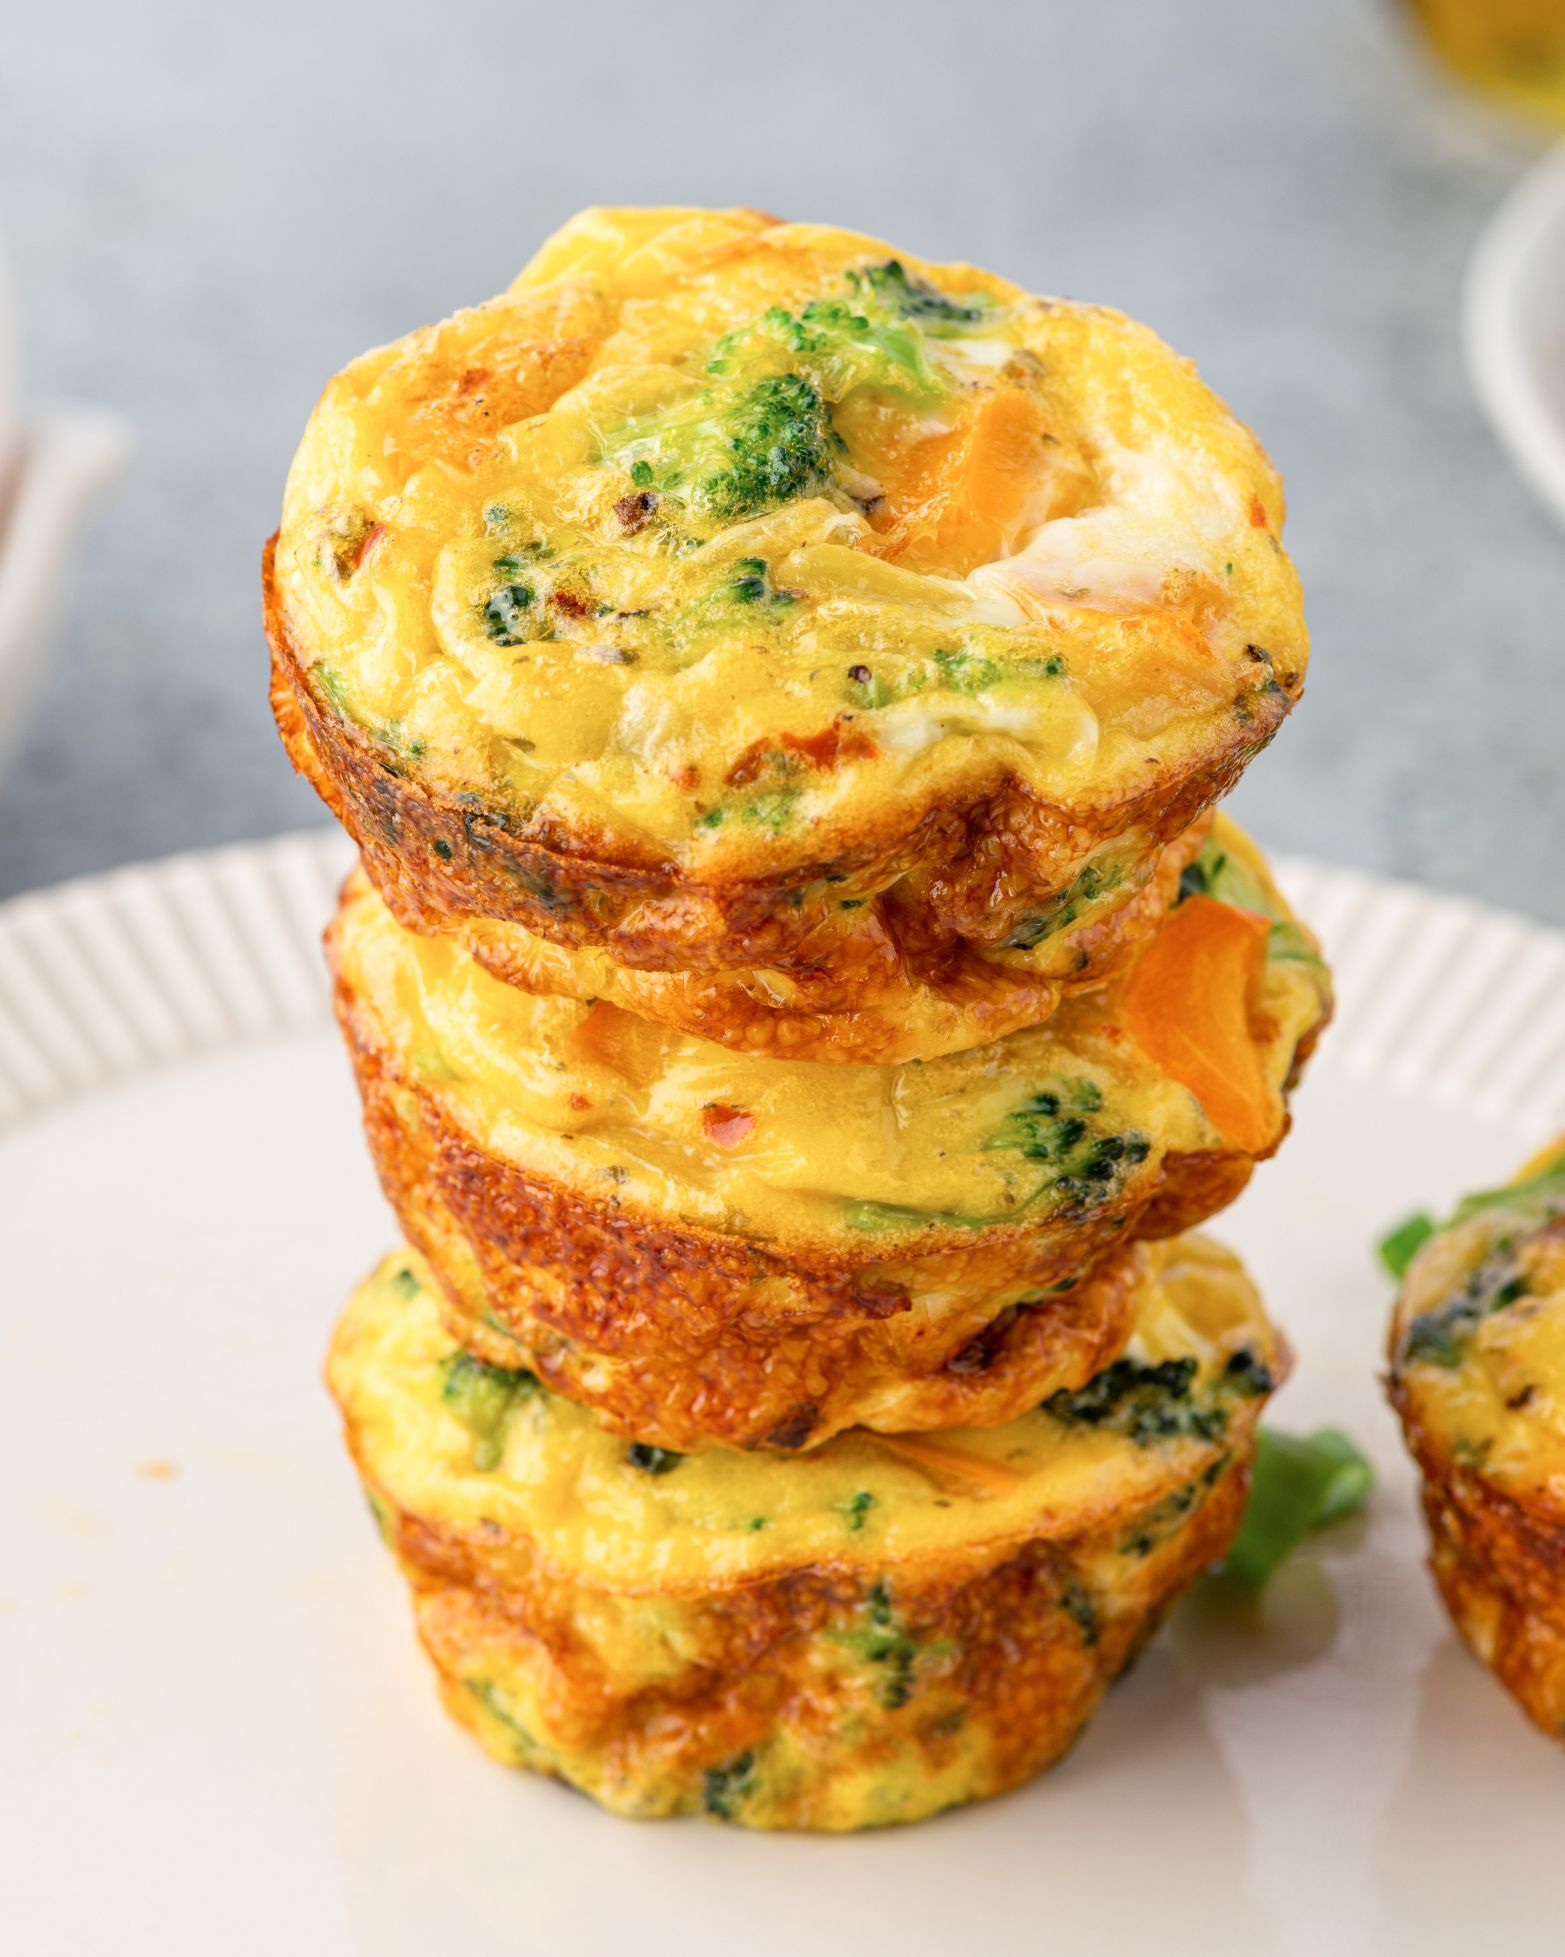 Three egg muffins stacked on a plate.